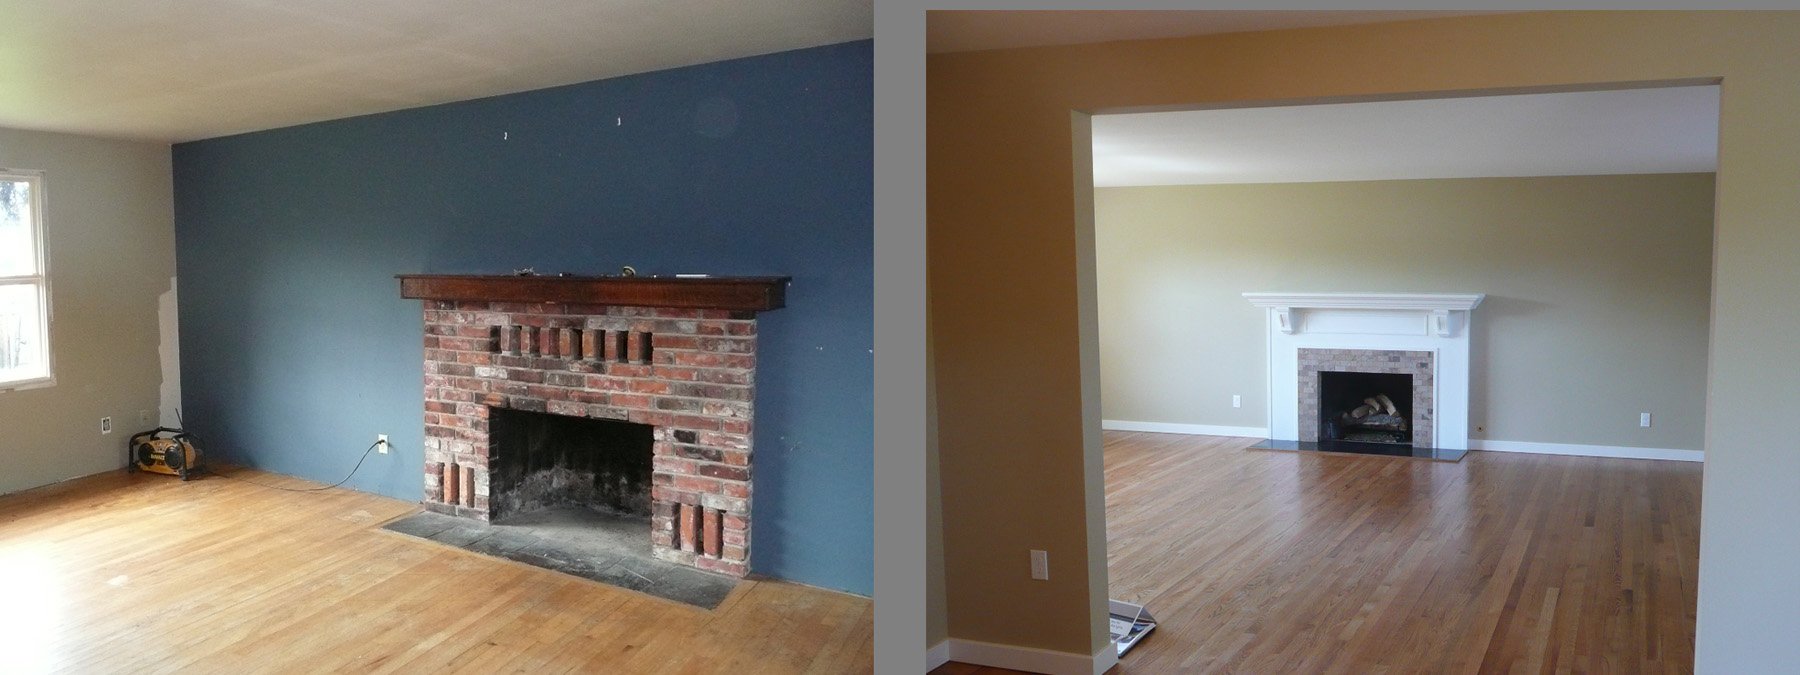 Fireplace Remodel    